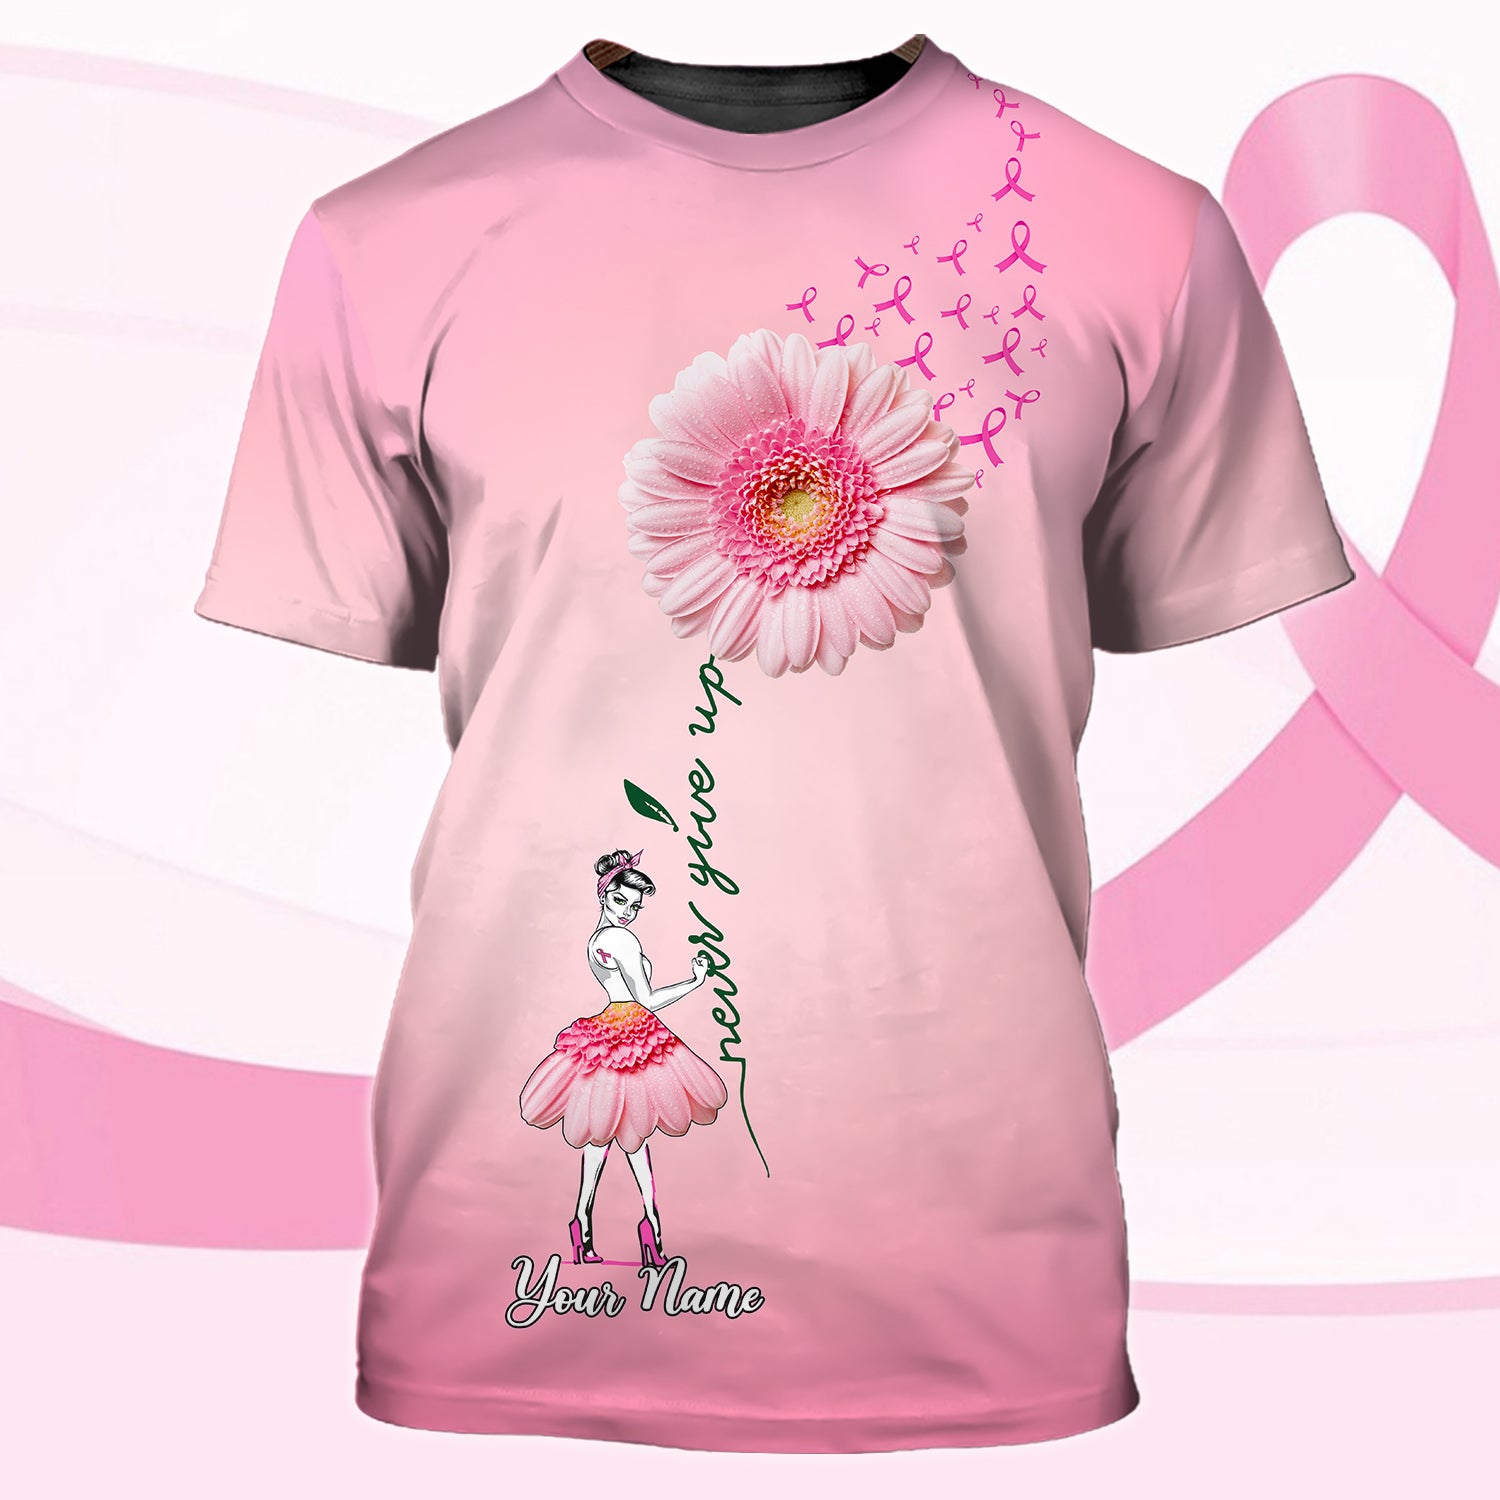 BREAST CANCER AWARENESS - Personalized Name 3D T Shirt 04 - Cv98